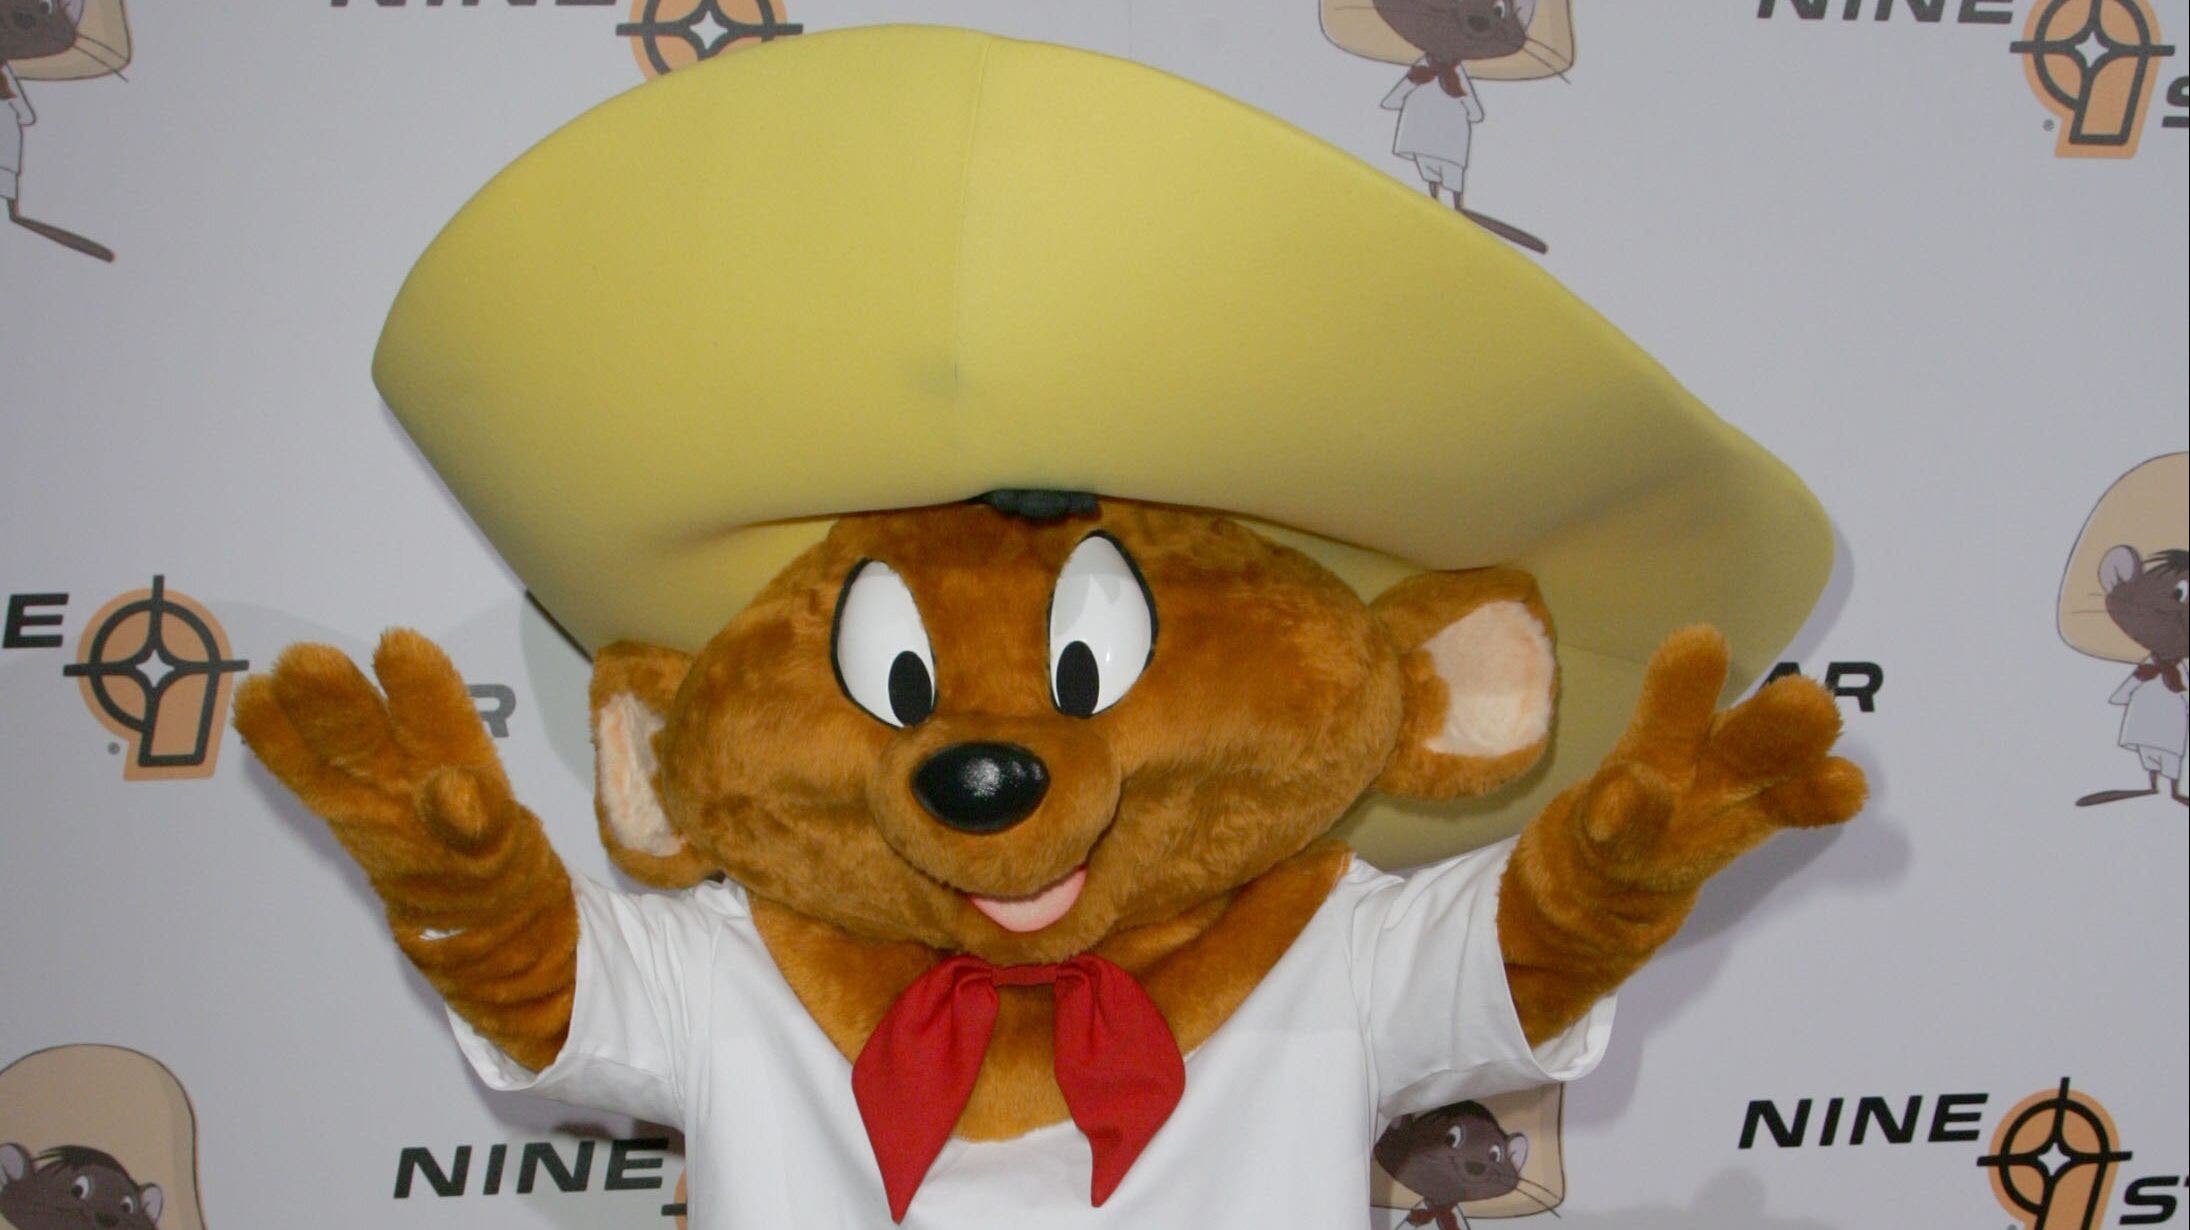 Speedy Gonzales defended after the NY Times columnist detonated “corrosive stereotype”